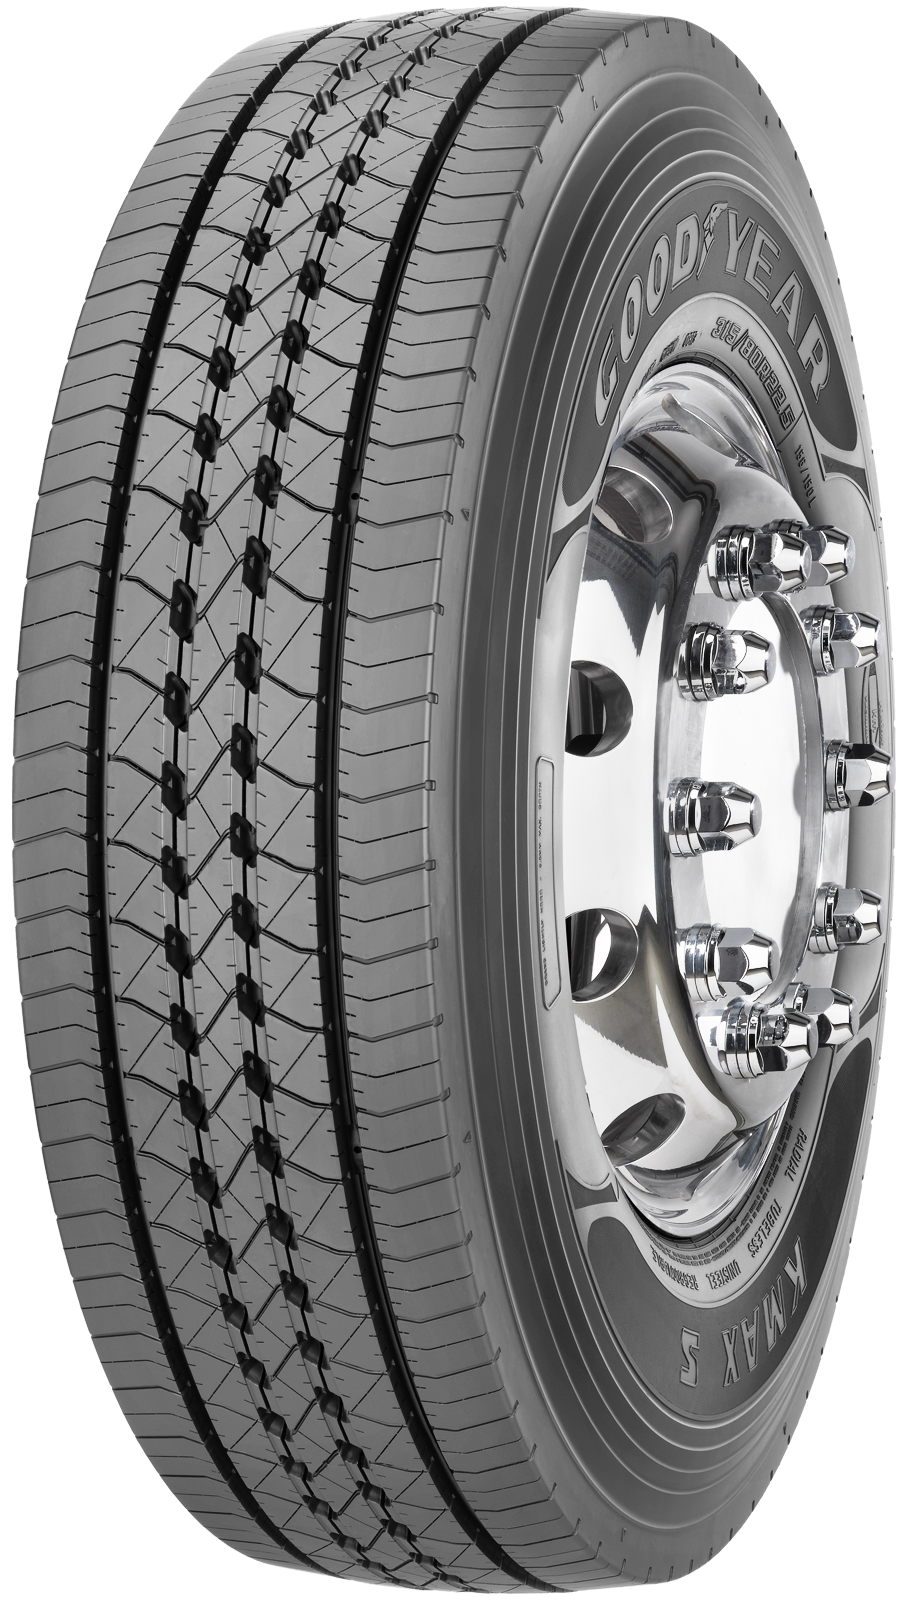 Anvelope camioane 315/70R22.5 156/150L Good Year Kmax S Gen-2 TL